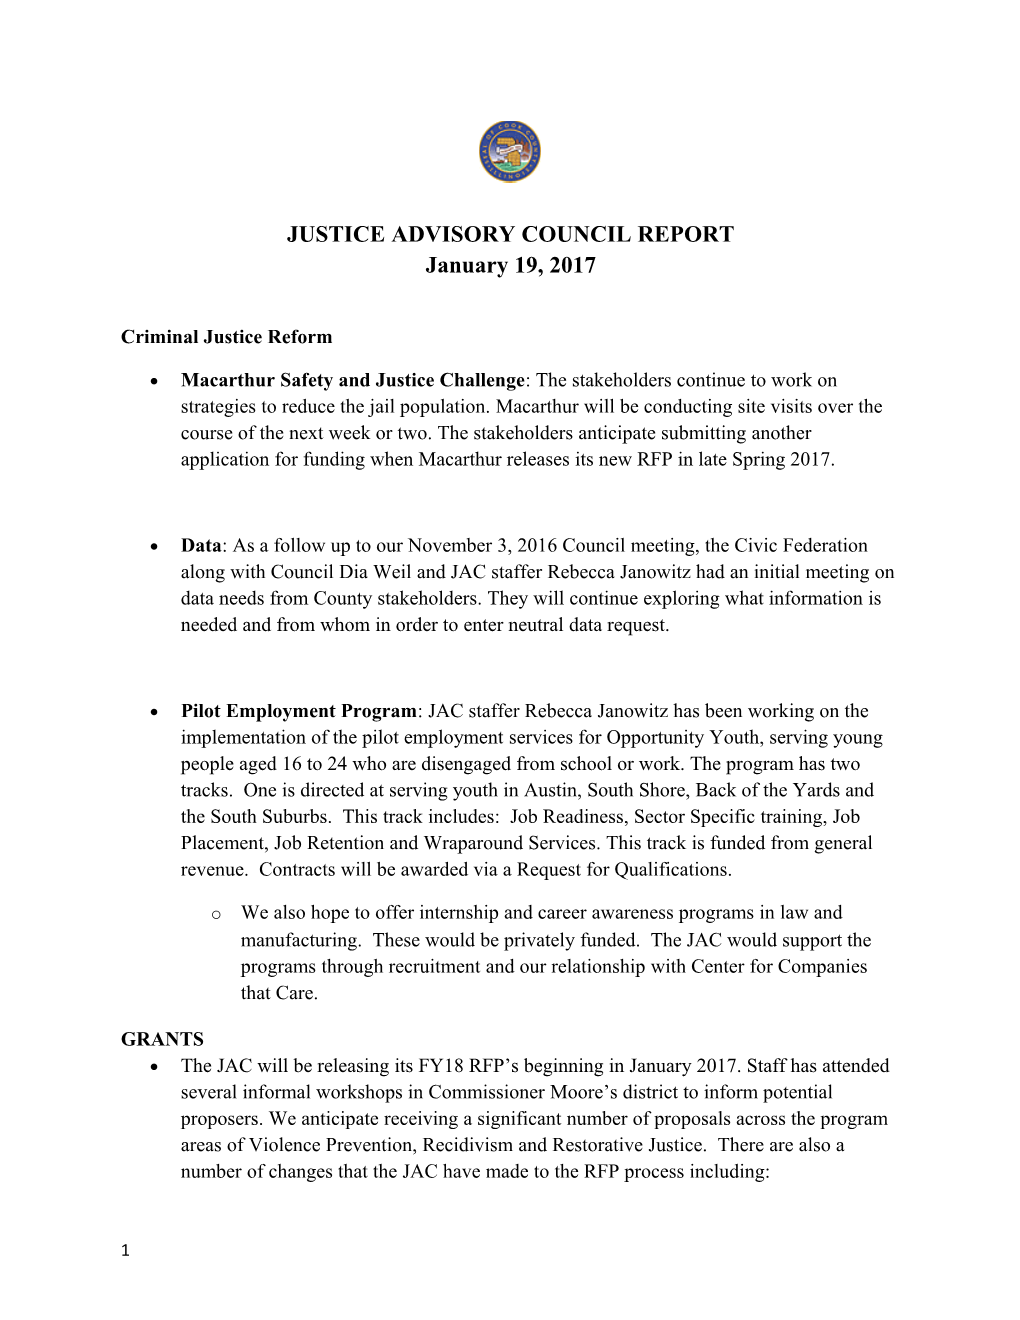 Justice Advisory Council Report